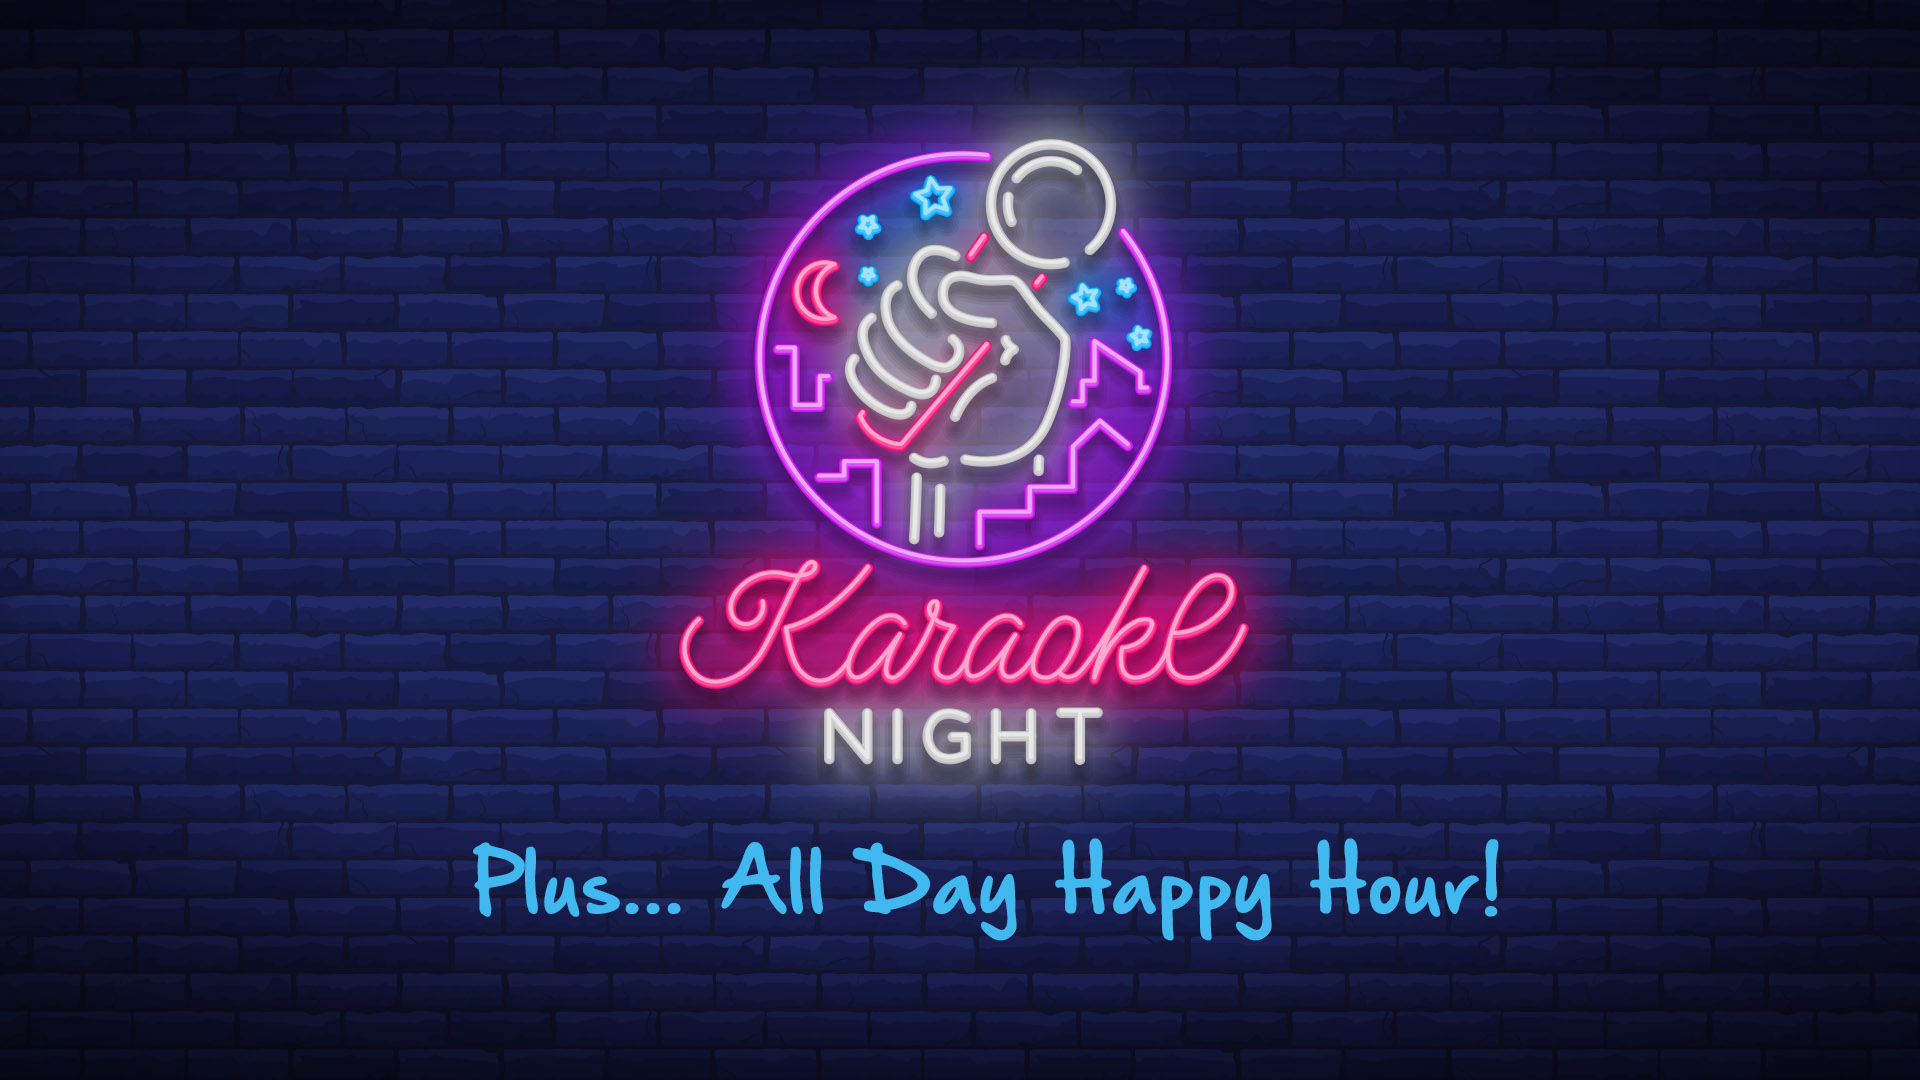 Neon sign hanging on a blue brick wall with microphone to promote Karaoke night at Bottled in Bond The Parlour. Plus there will be all day happy hour.